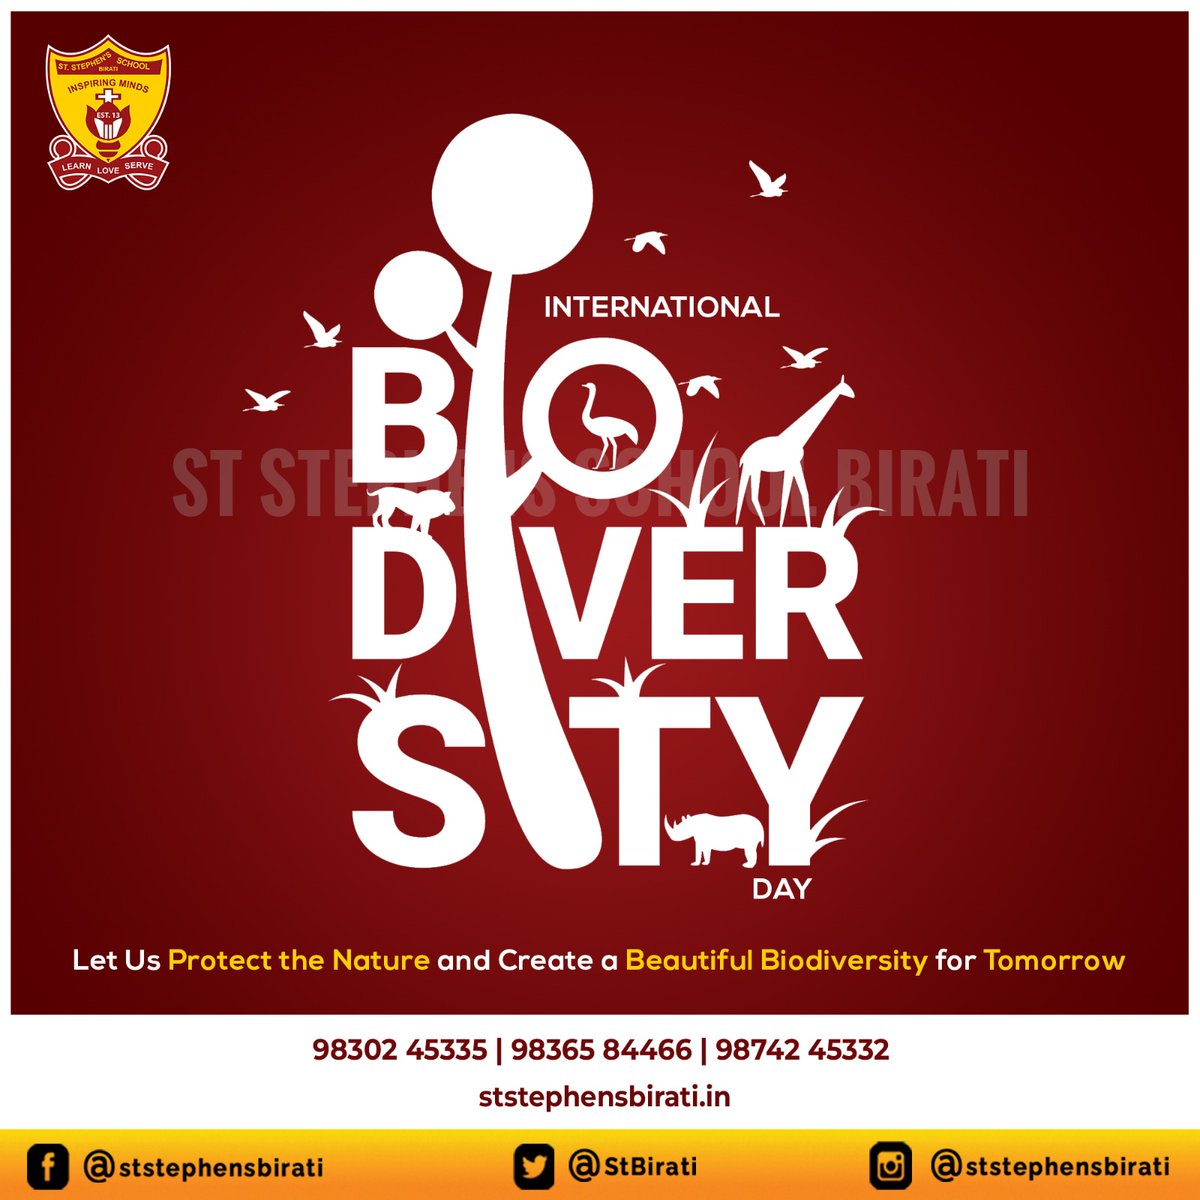 Let Us Maintain the Vibrancy of Nature by Safeguarding the Biodiversity. #StStephensSchoolBirati #BiodiversityDay #InternationalBiodiversityDay #ProtectBiodiversity #ConservationMatters #NatureMatters #SaveOurSpecies #BiodiversityConservation #EcosystemProtection